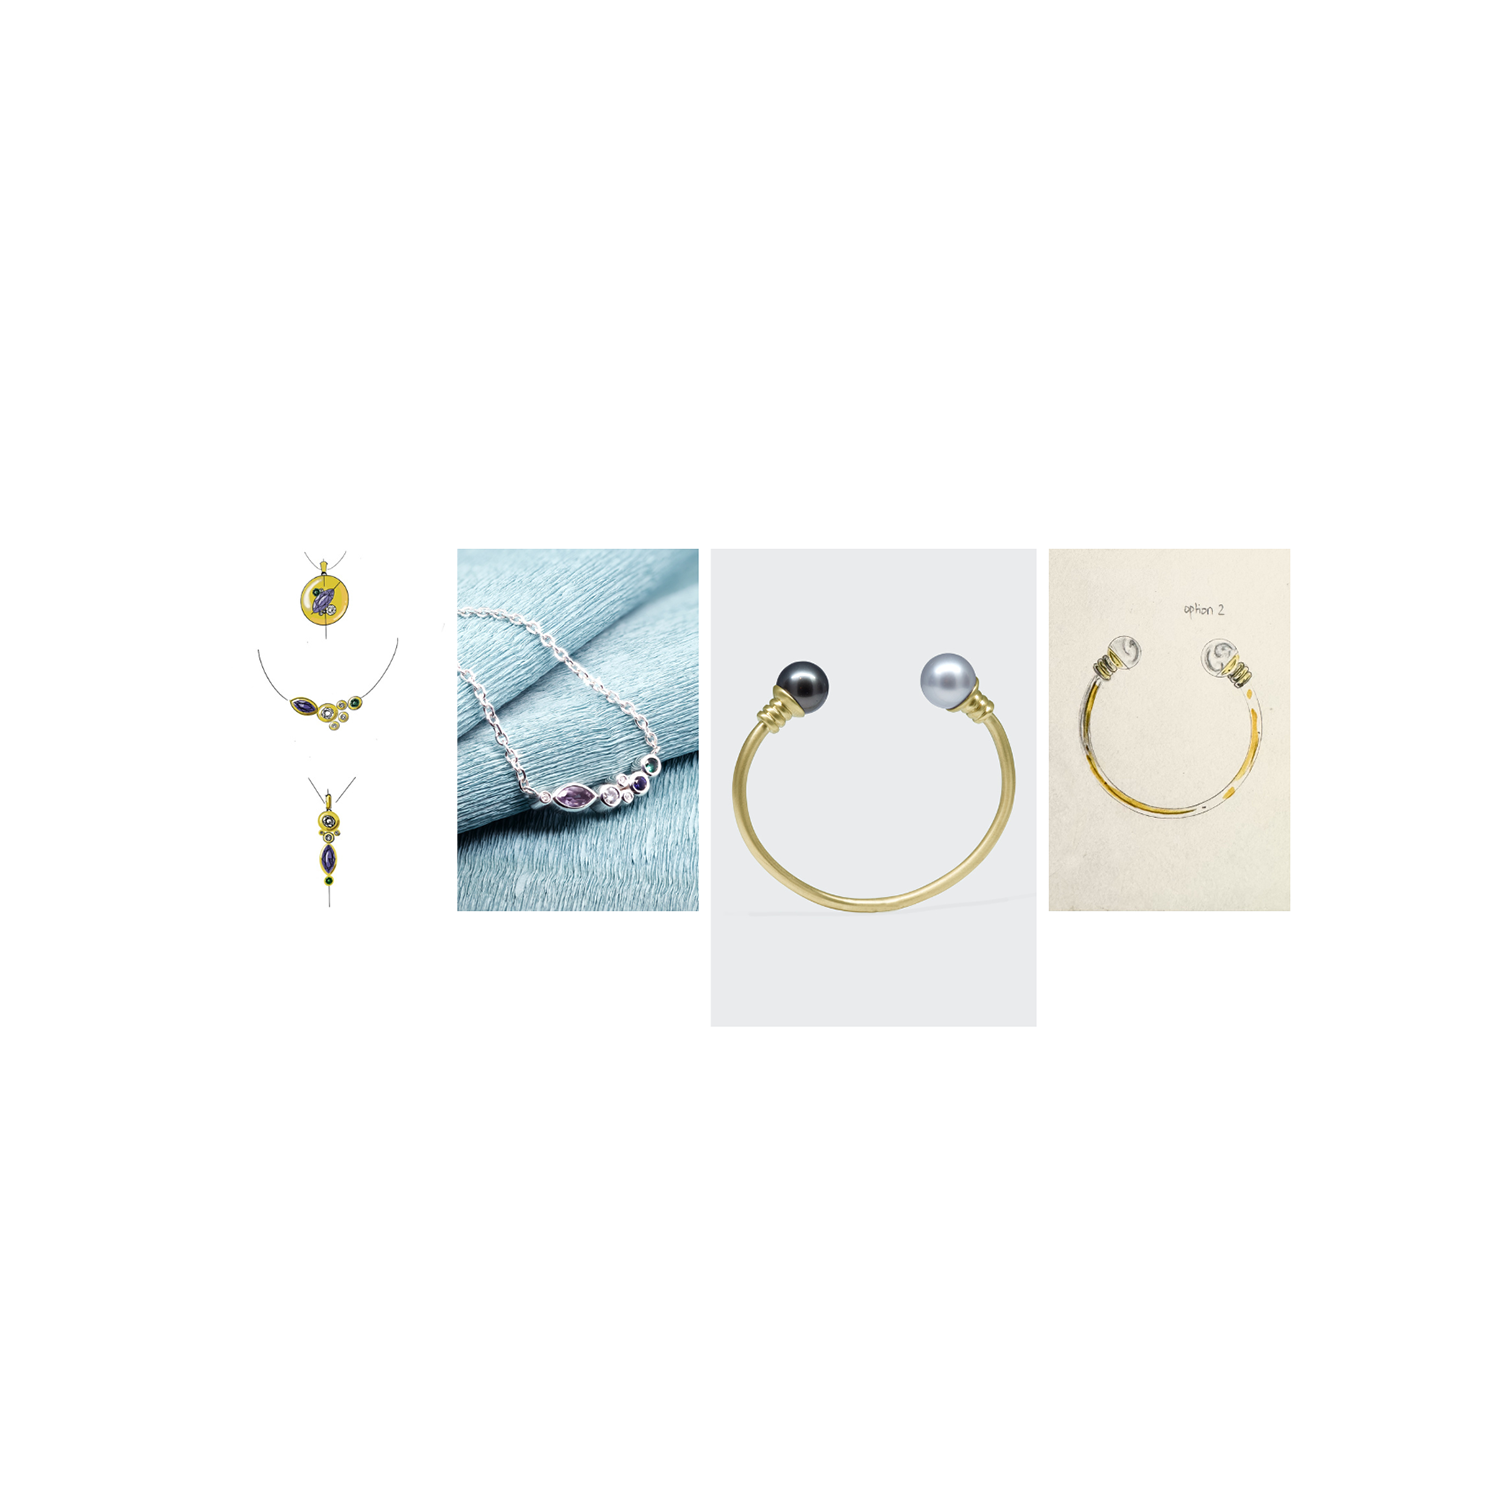 Custom jewellery design drawings with their finished and tangible counter part in gold. 3 drawings of necklace designs and one drawing of bracelet design.